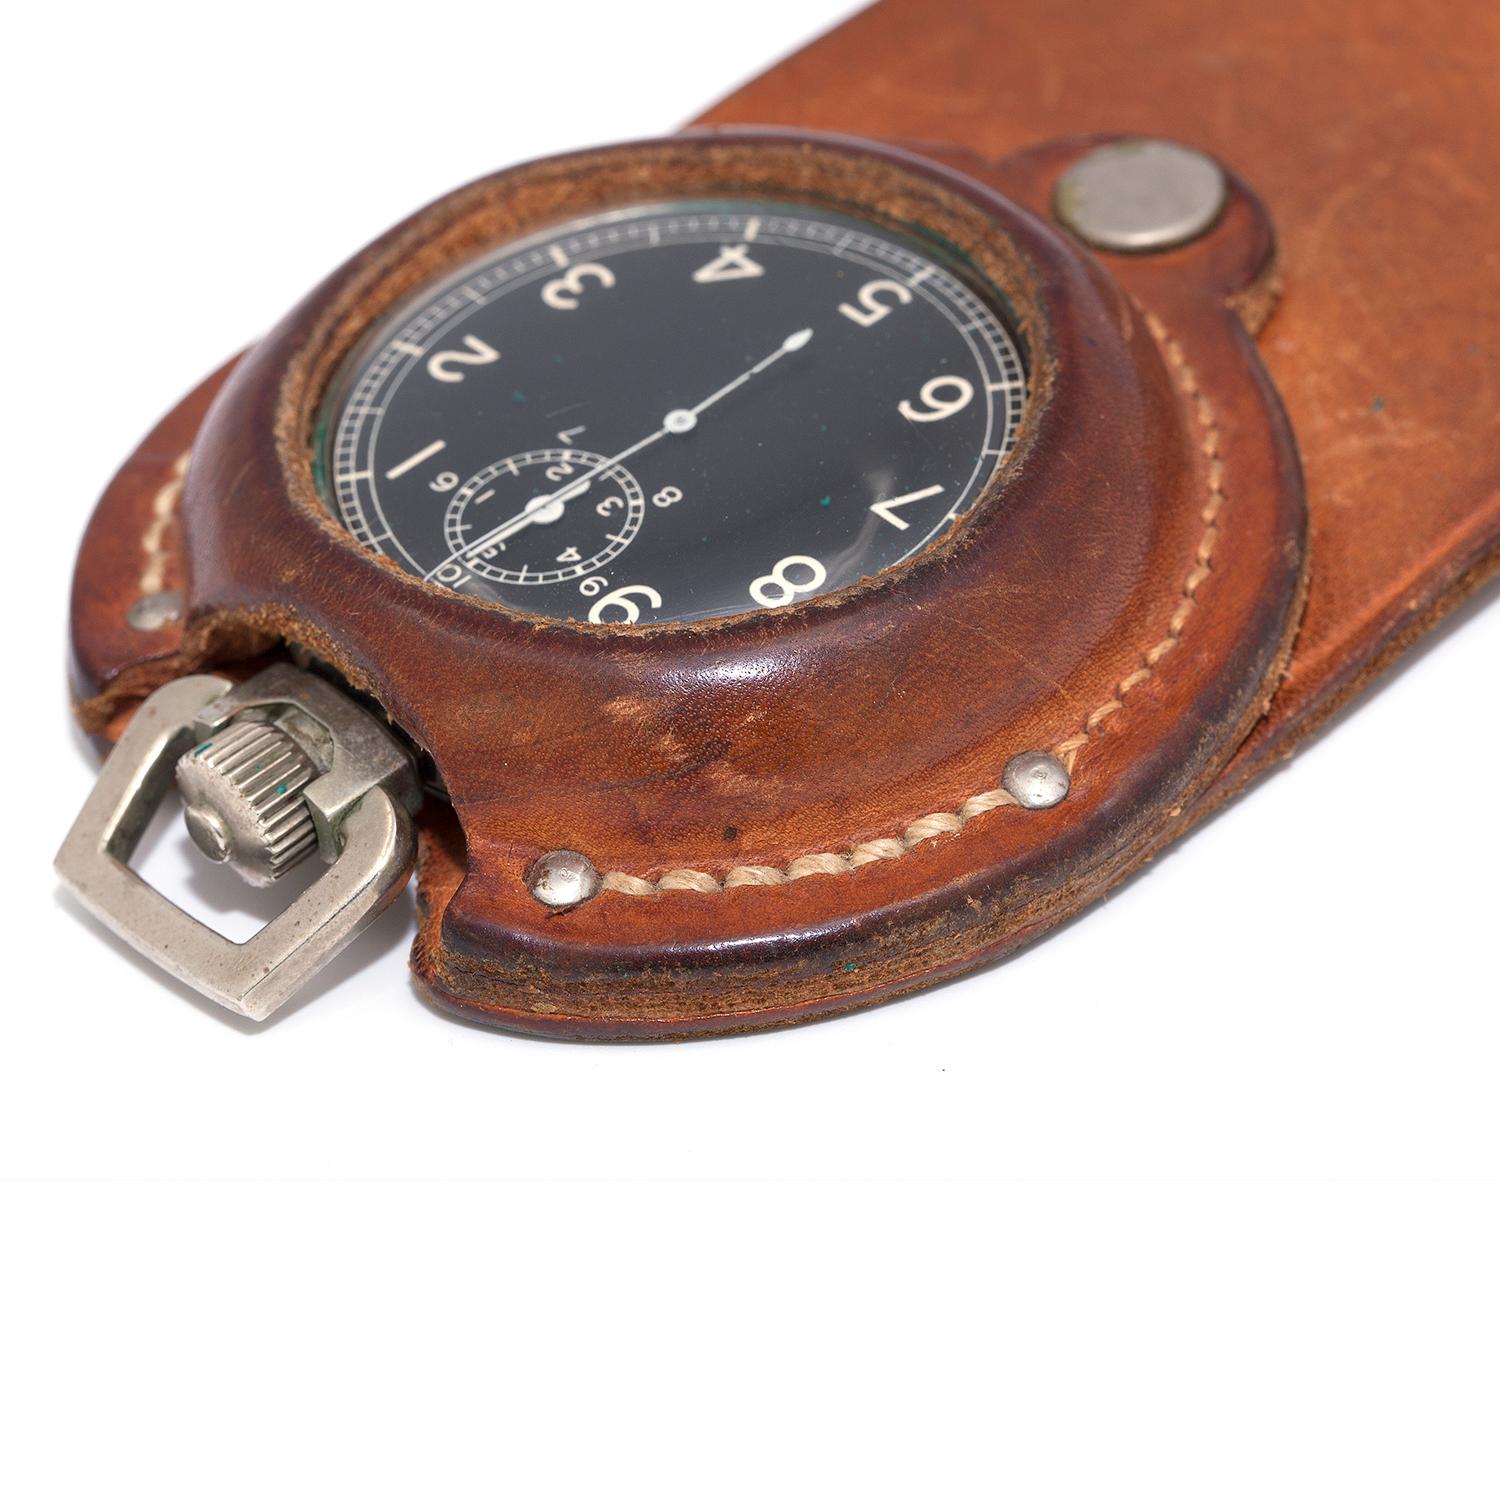  An equestrians stop watch suspended in a leather holster in excellent shape.